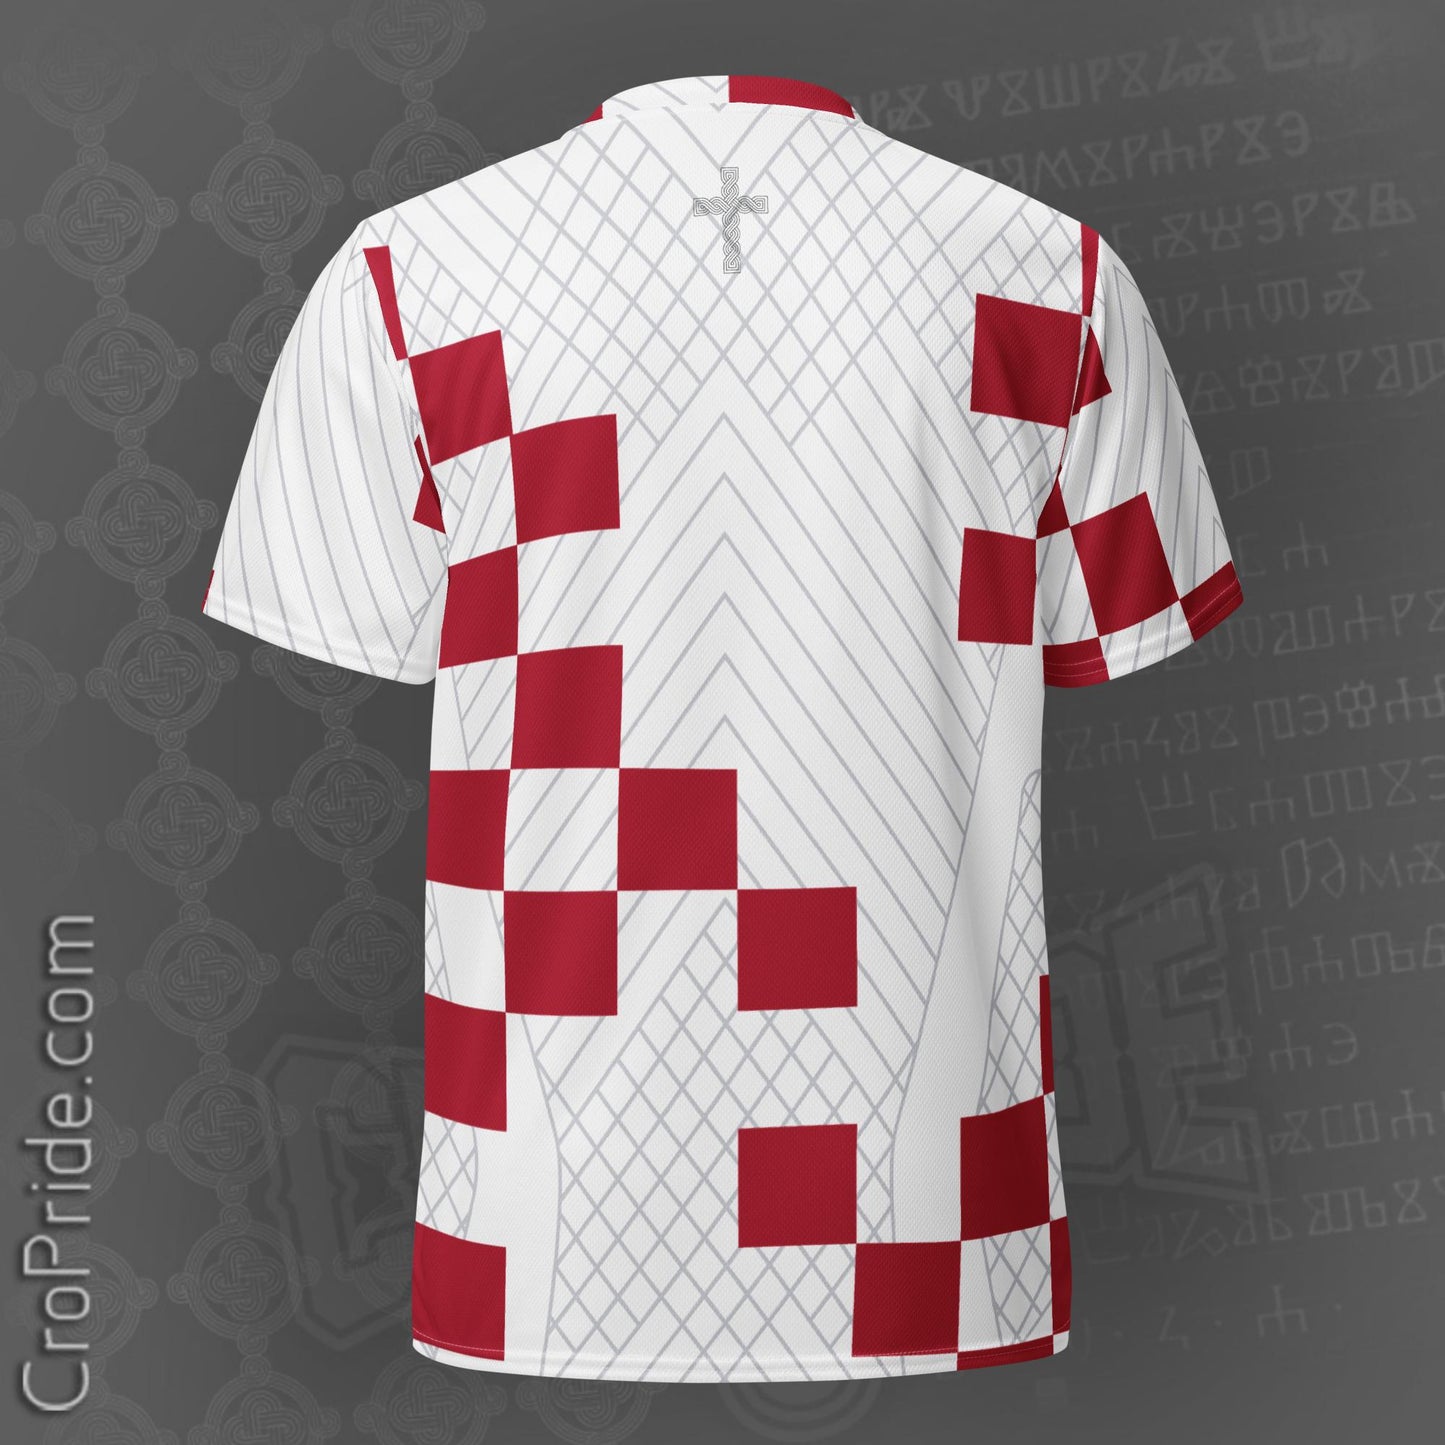 Croatian Checkers Inspired Jersey - Premium Croatian Jersey for Football Fans & Style Enthusiasts